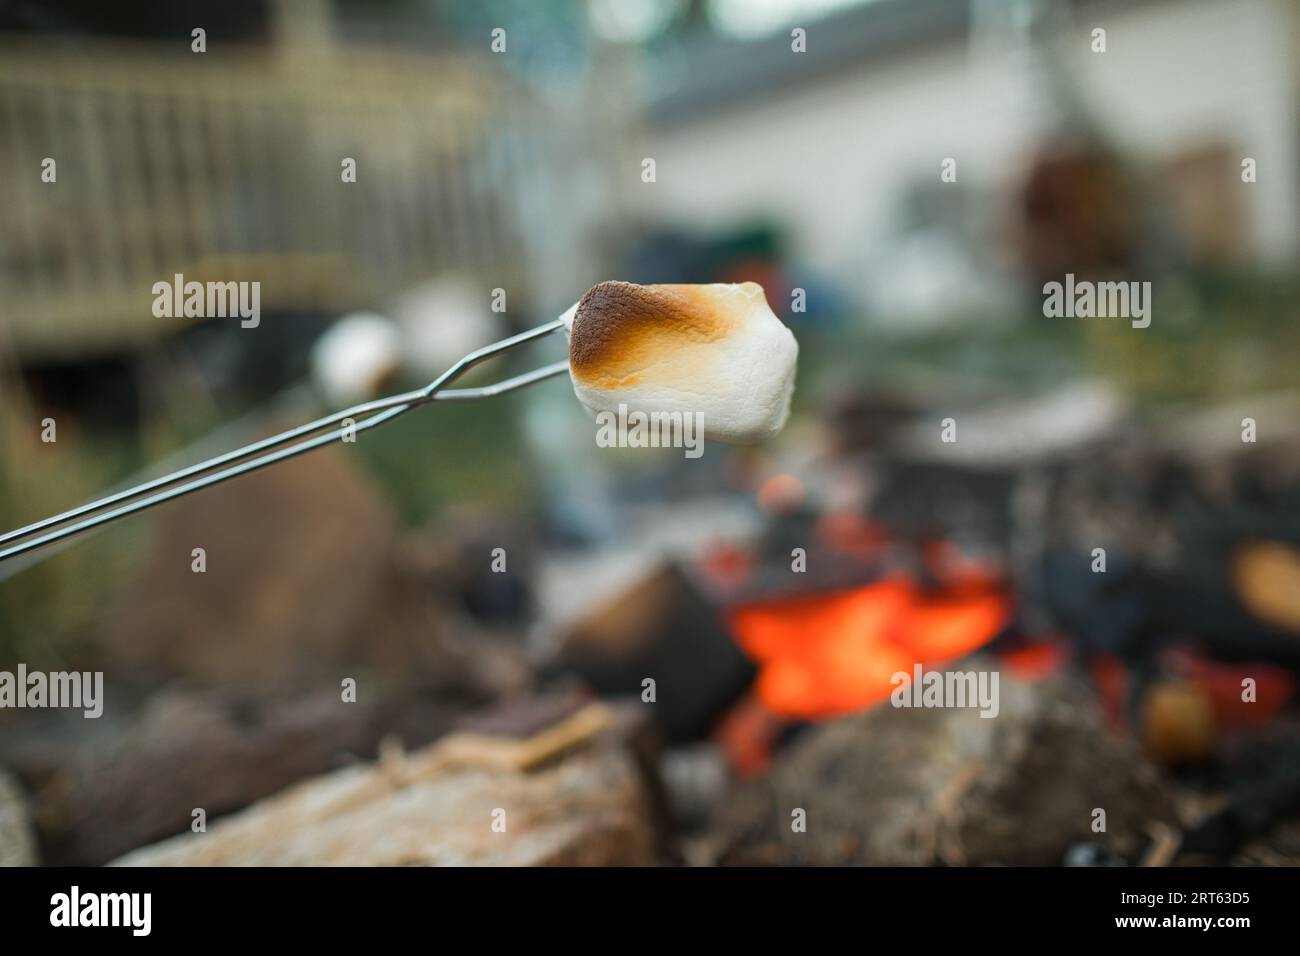 Golden marshmallow on skewer, campfire behind Stock Photo